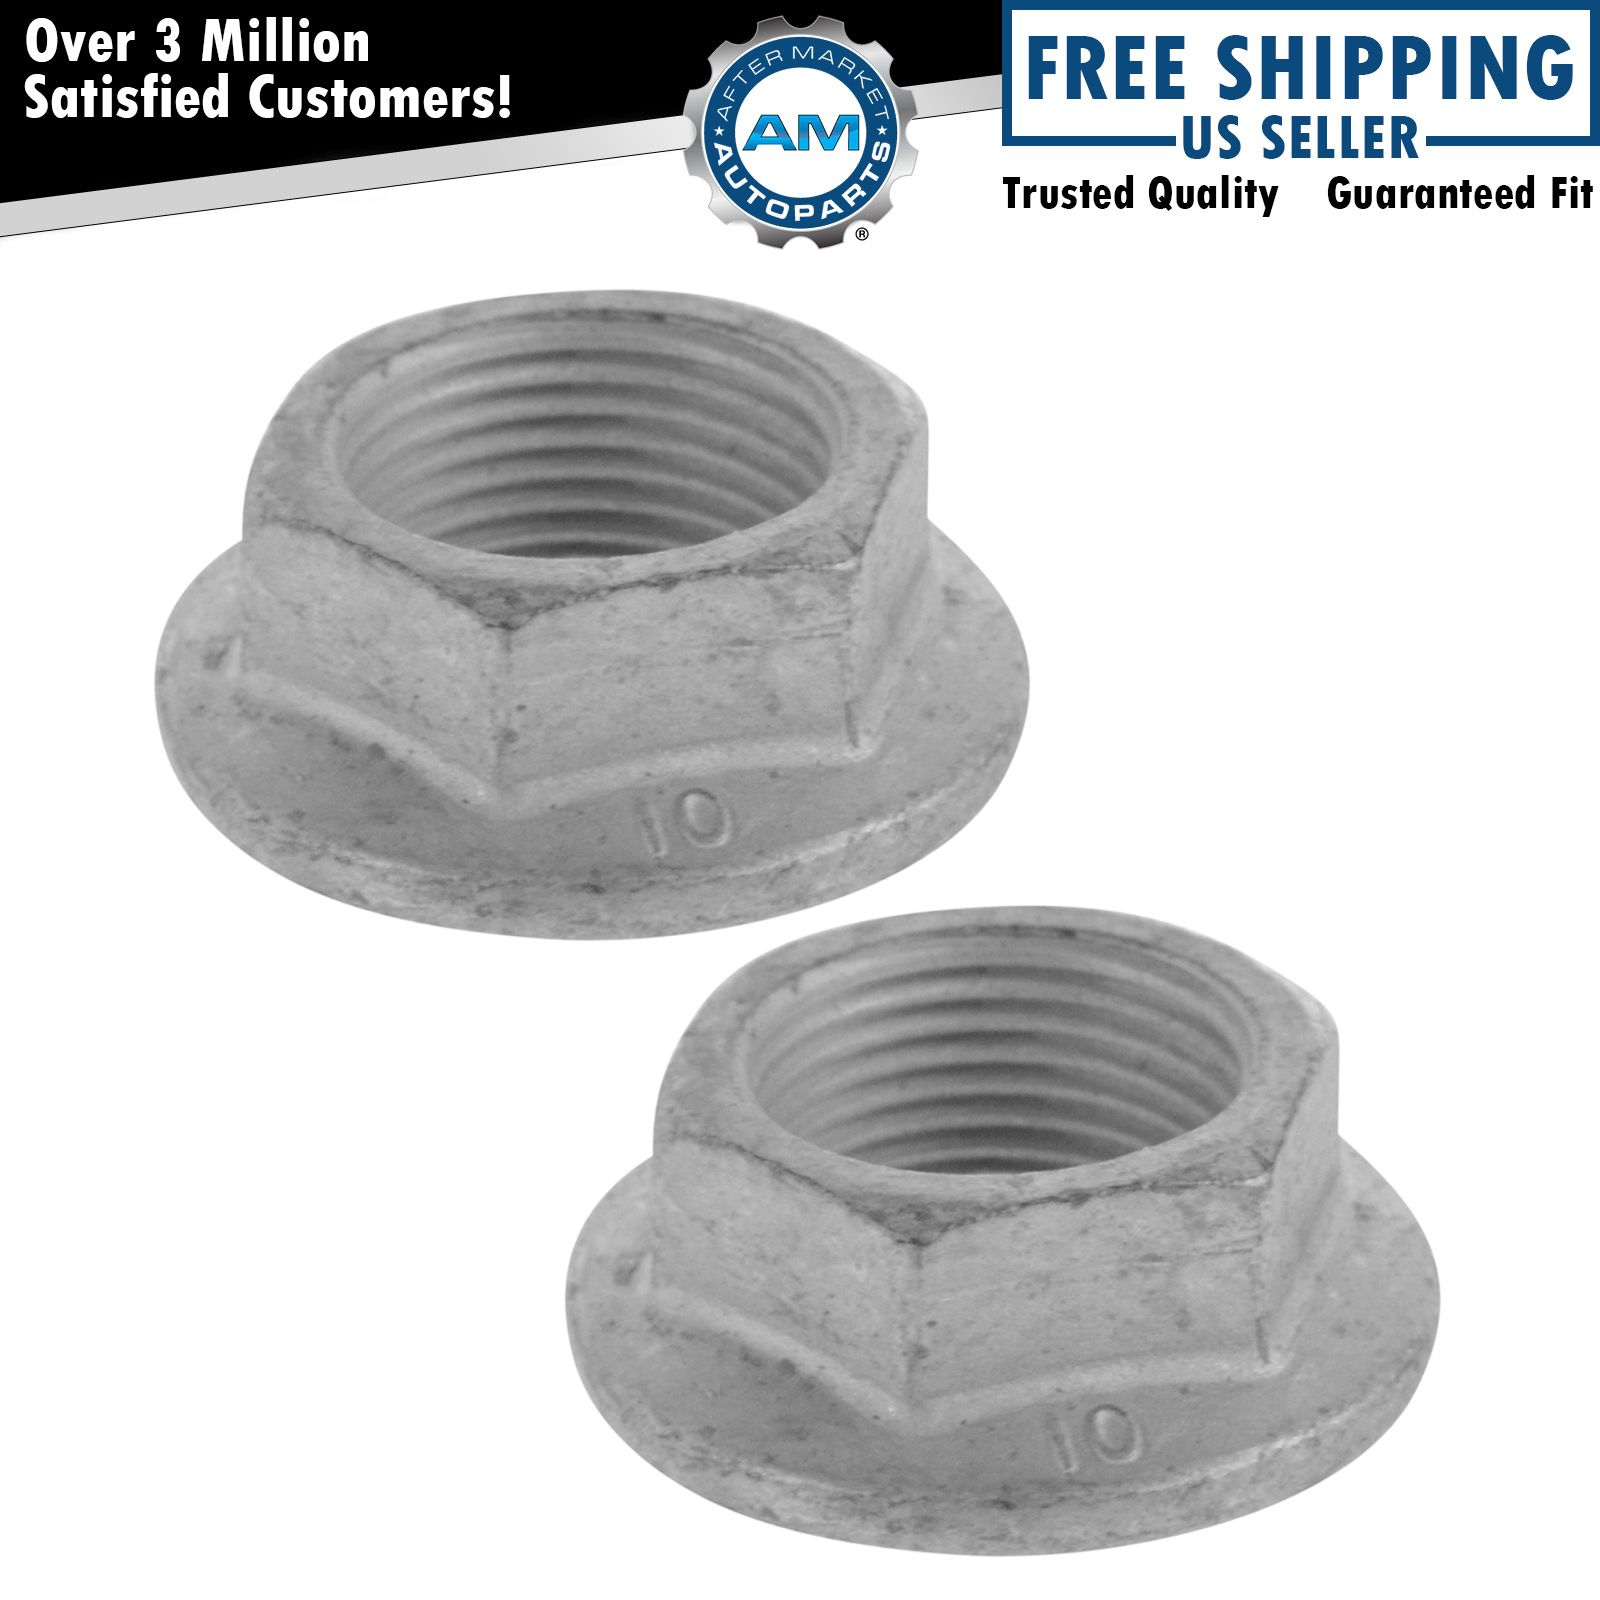 OEM 10257766 Axle Spindle Nut Pair Set of 2 Direct Fit for Chevy GMC Buick Caddy